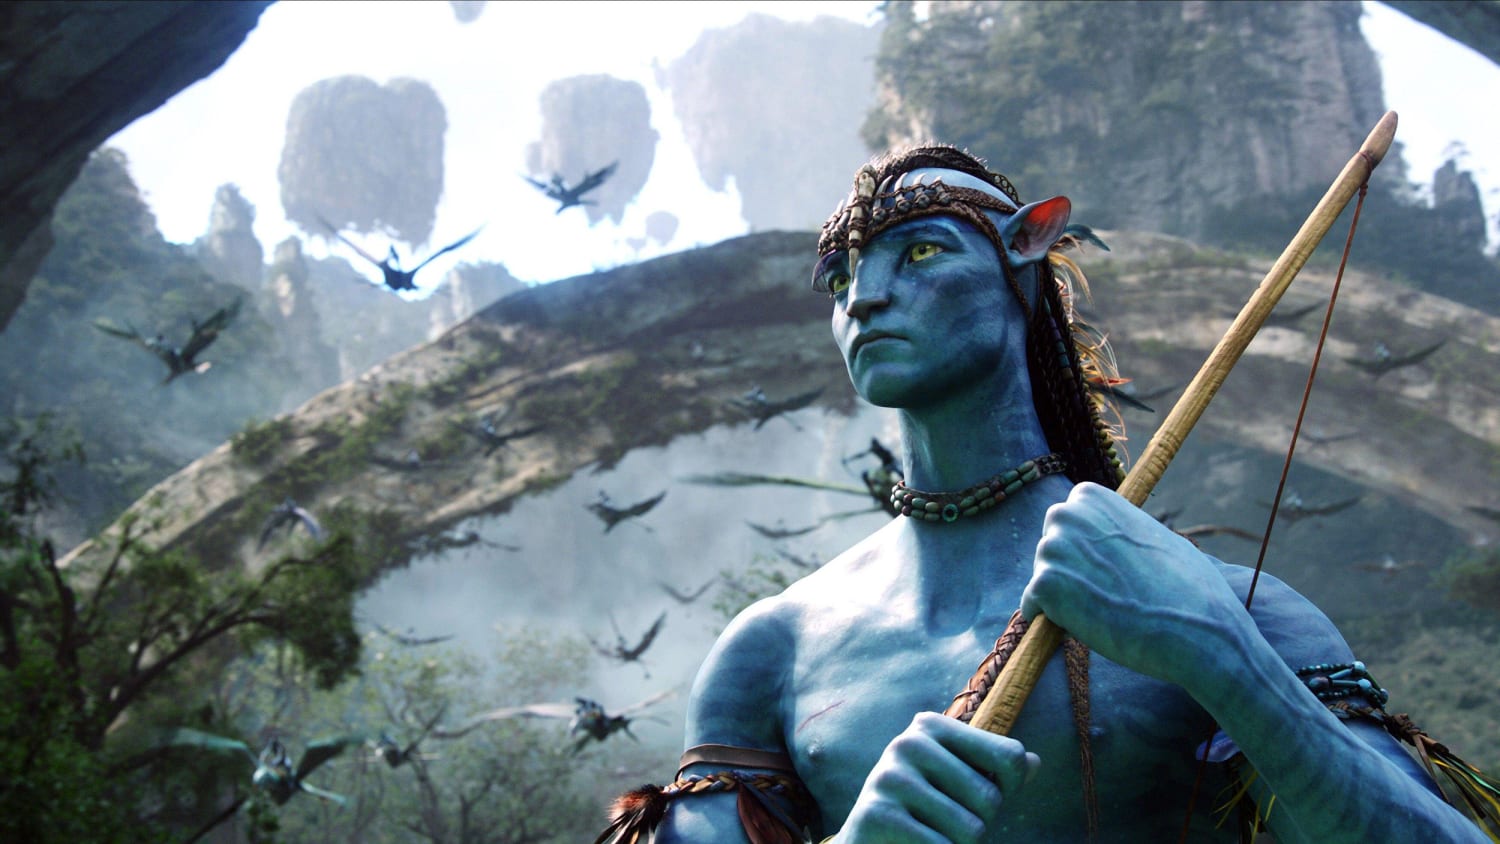 What To Remember From 'Avatar:' Movie Recap Before Sequel